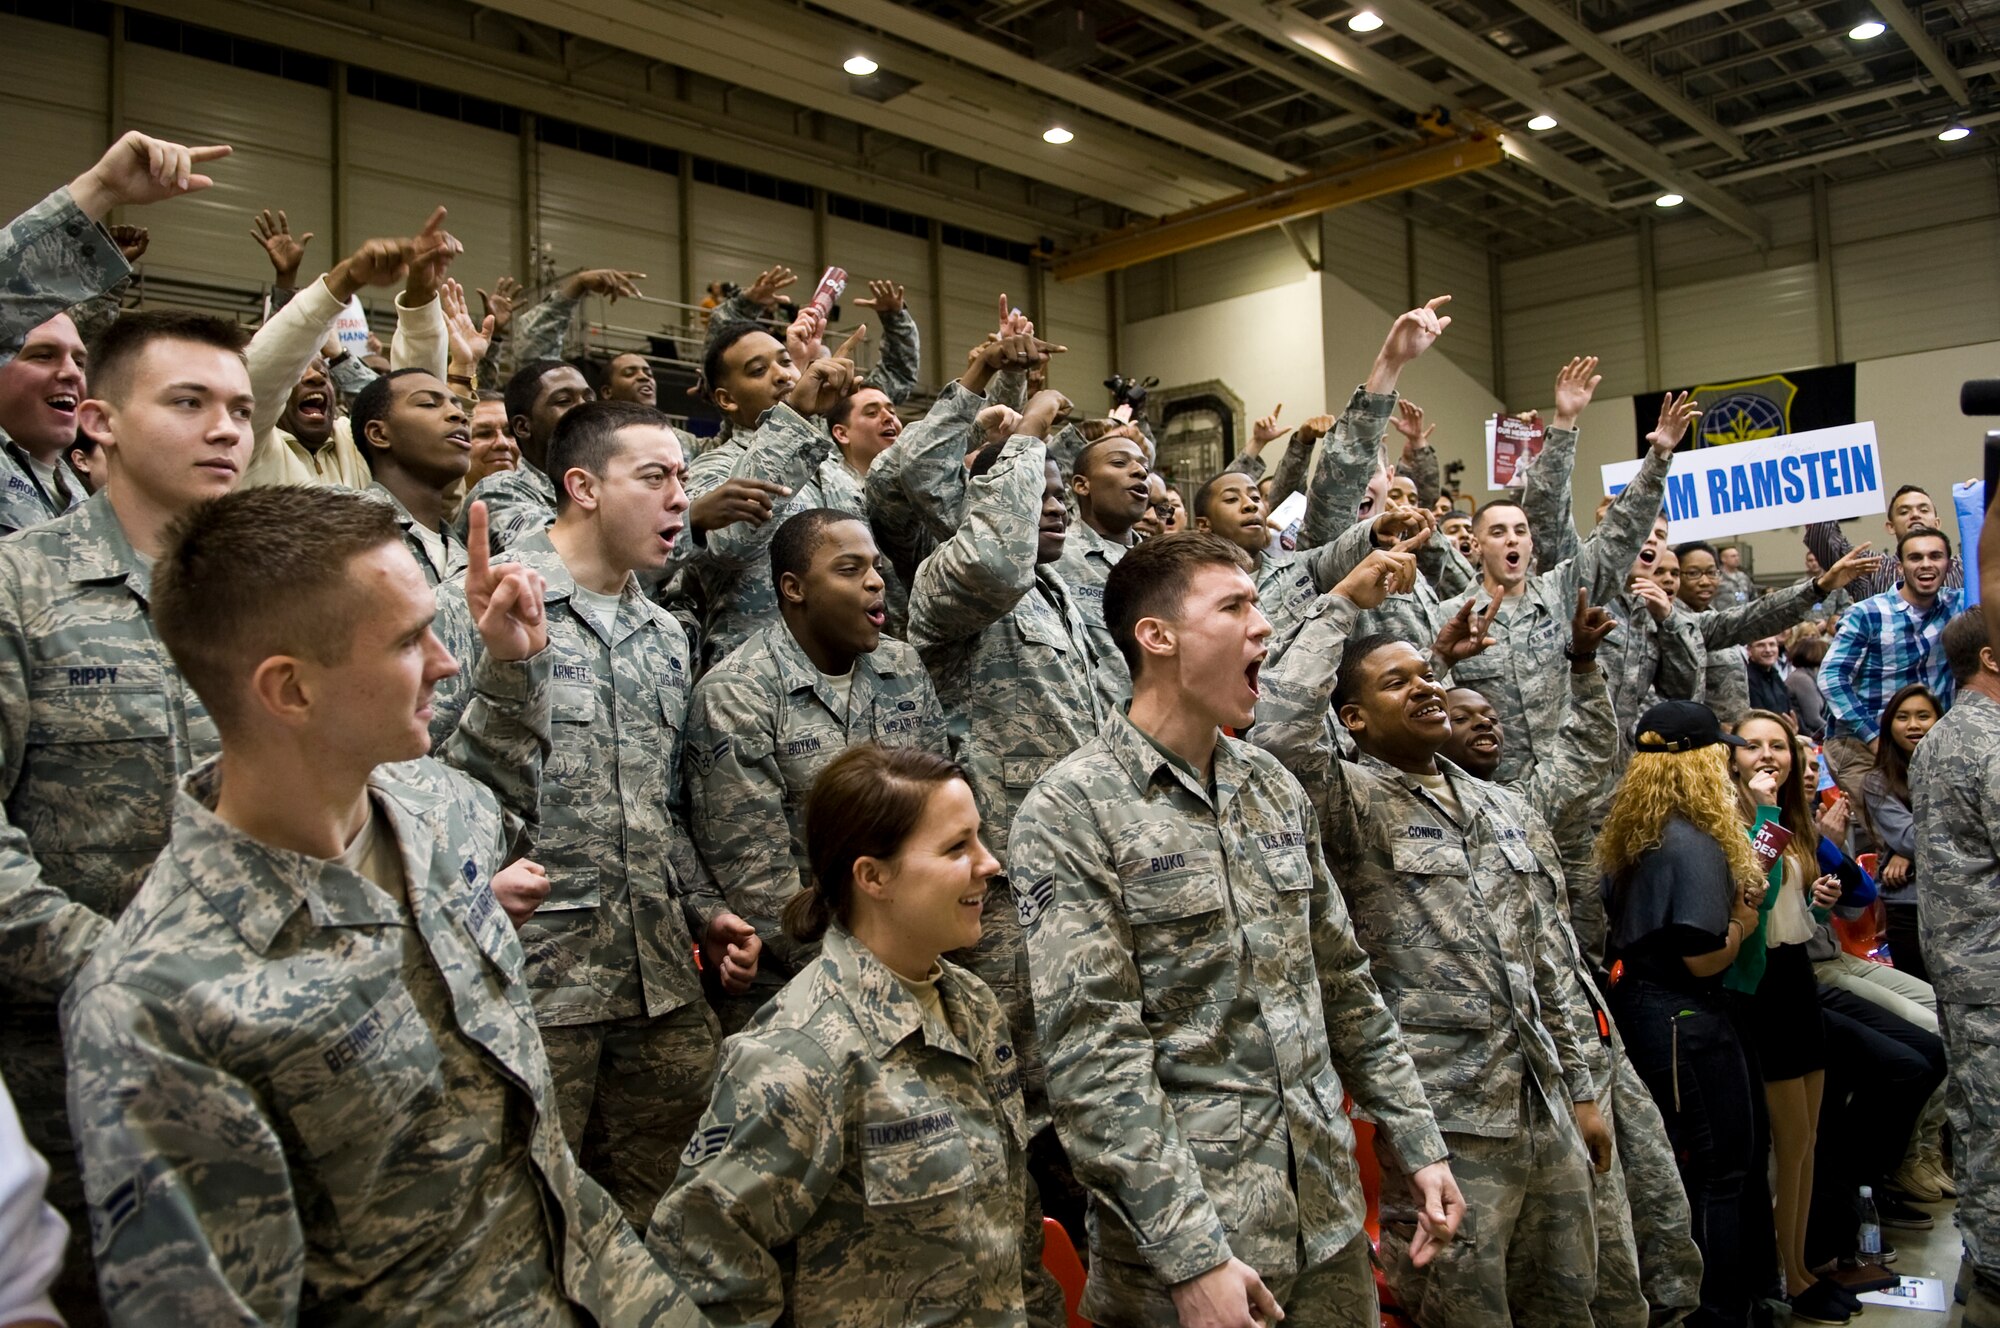 Airmen cheer for the ESPN camera during the Armed Forces Classic basketball game between the Michigan State Spartans and University of Connecticut Huskies at Ramstein Air Base, Germany, Nov. 10, 2012.  The Huskies overcame the Spartans 66-62. (U.S. Air Force photo/Master Sgt. Wayne Clark)